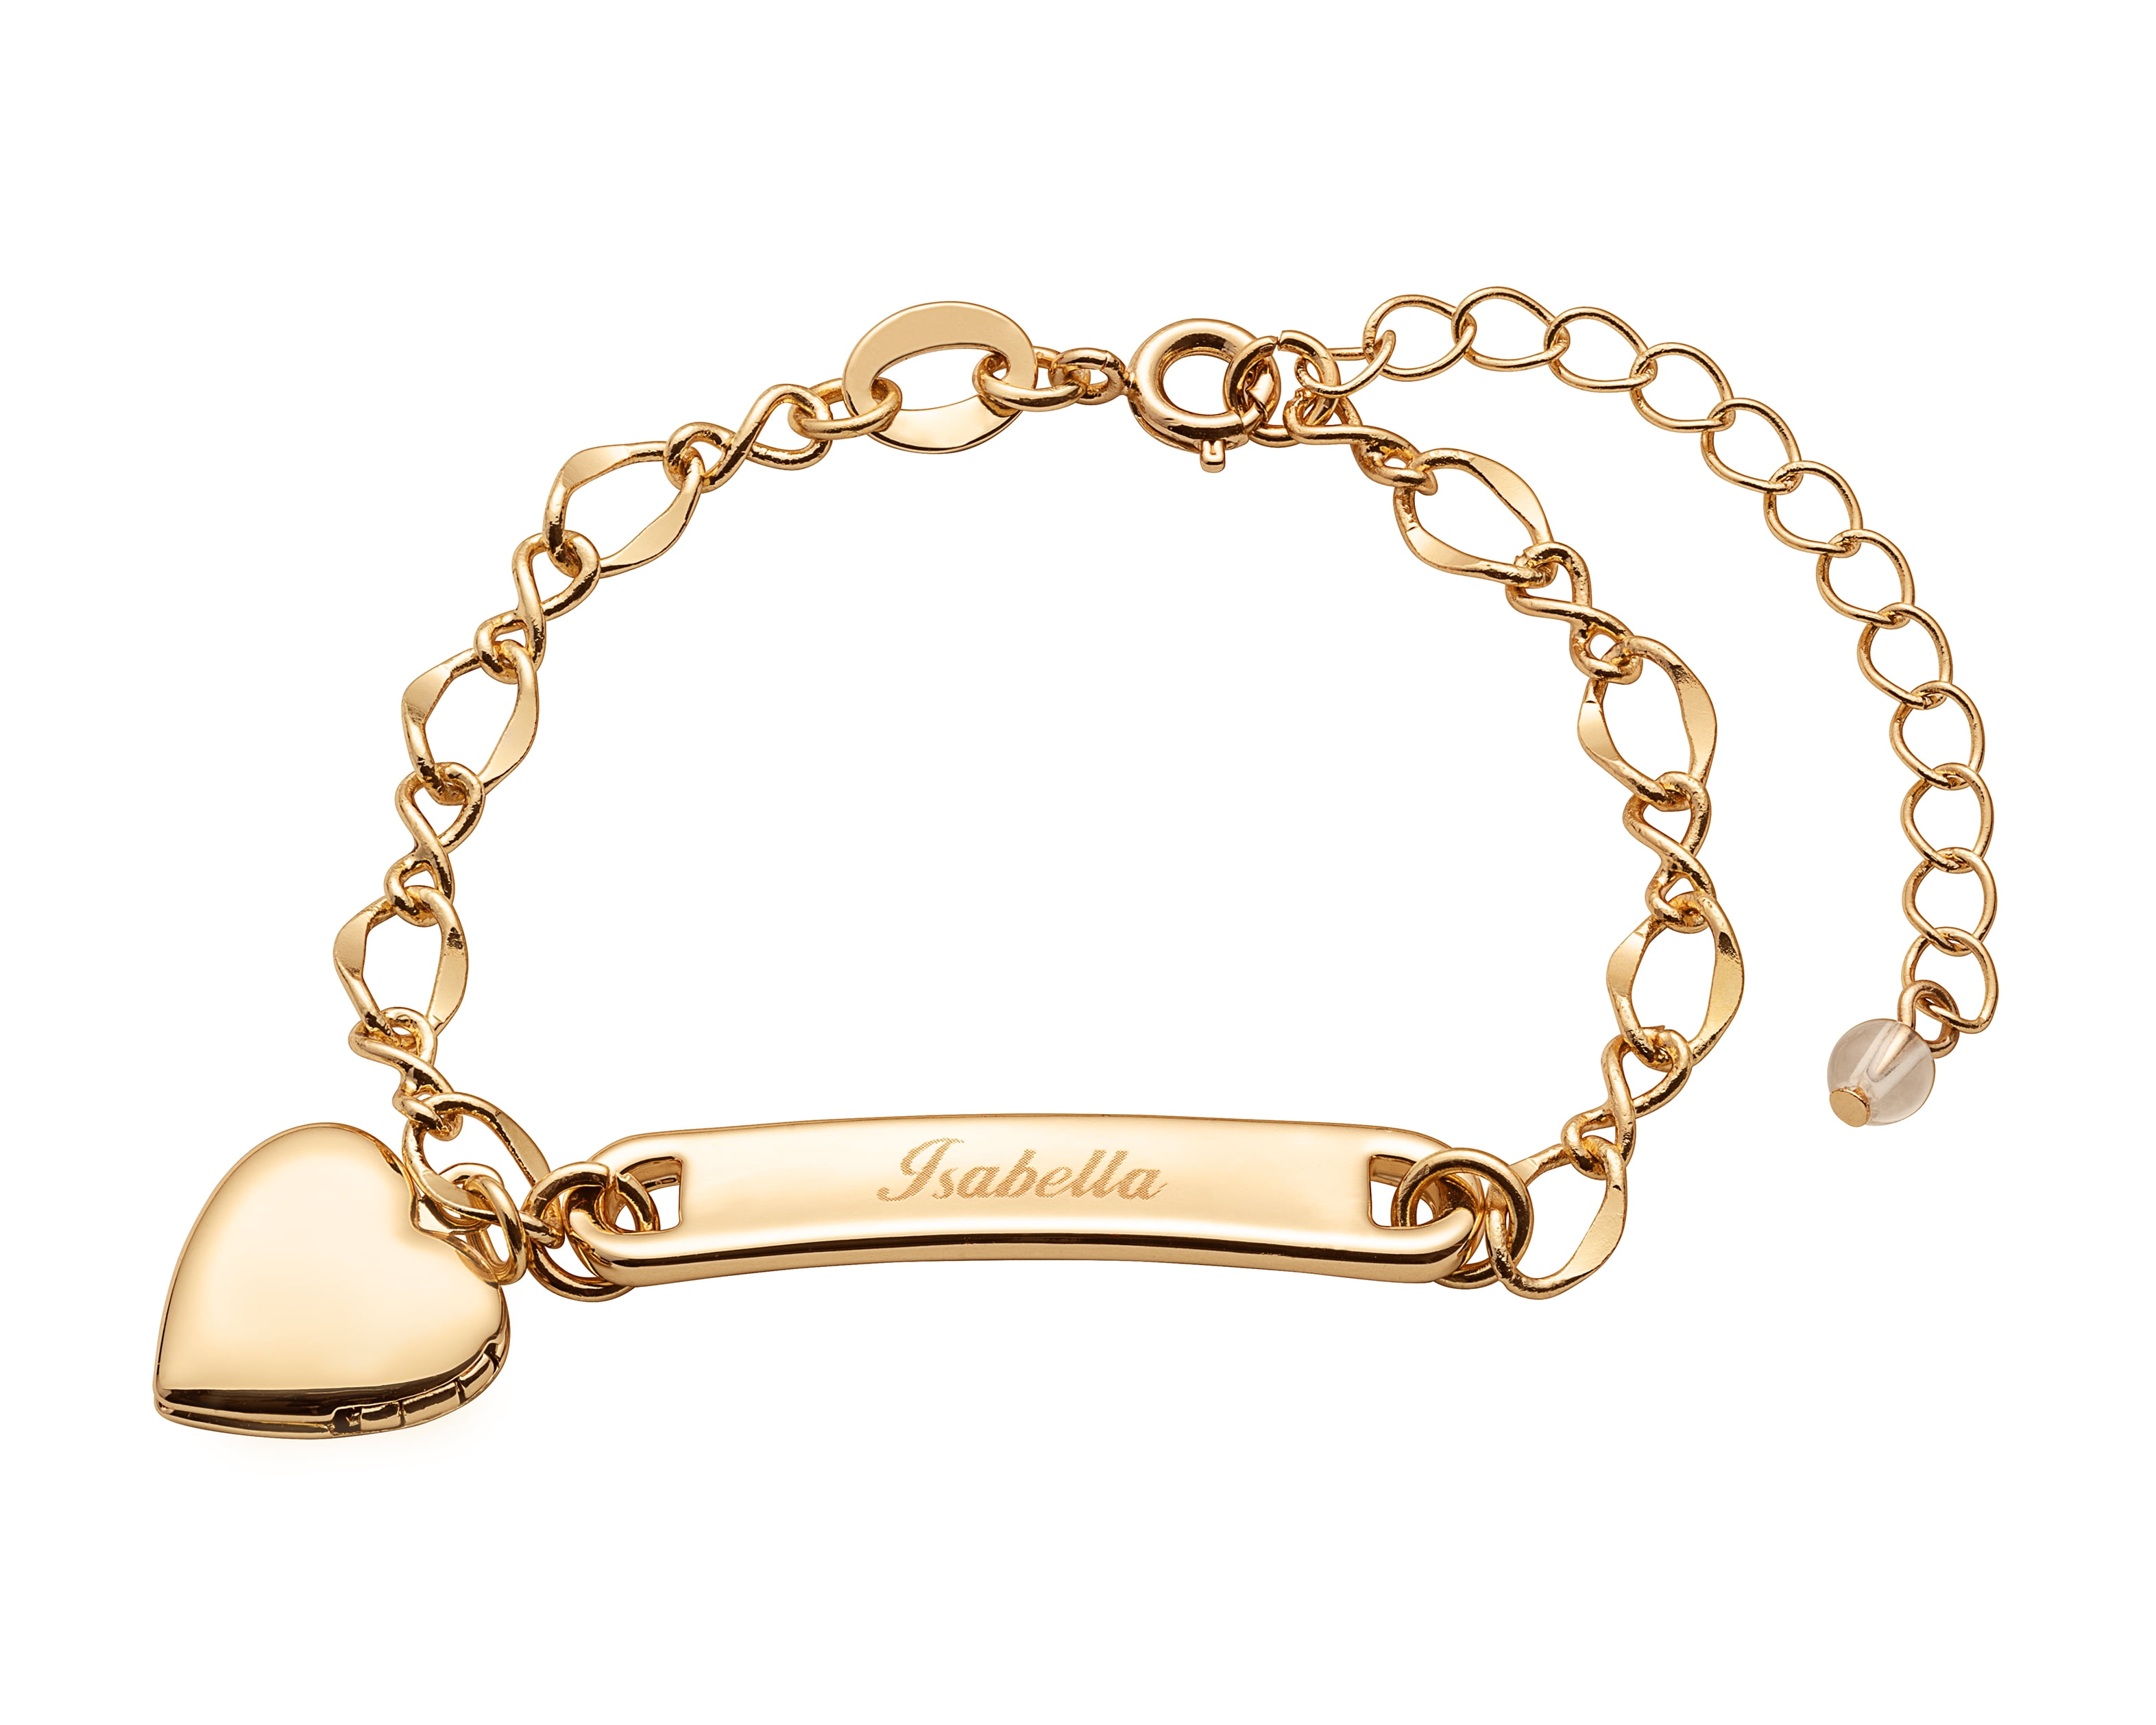 Personalized 14kt Gold-Plated Girls& Heart Charm Bracelet